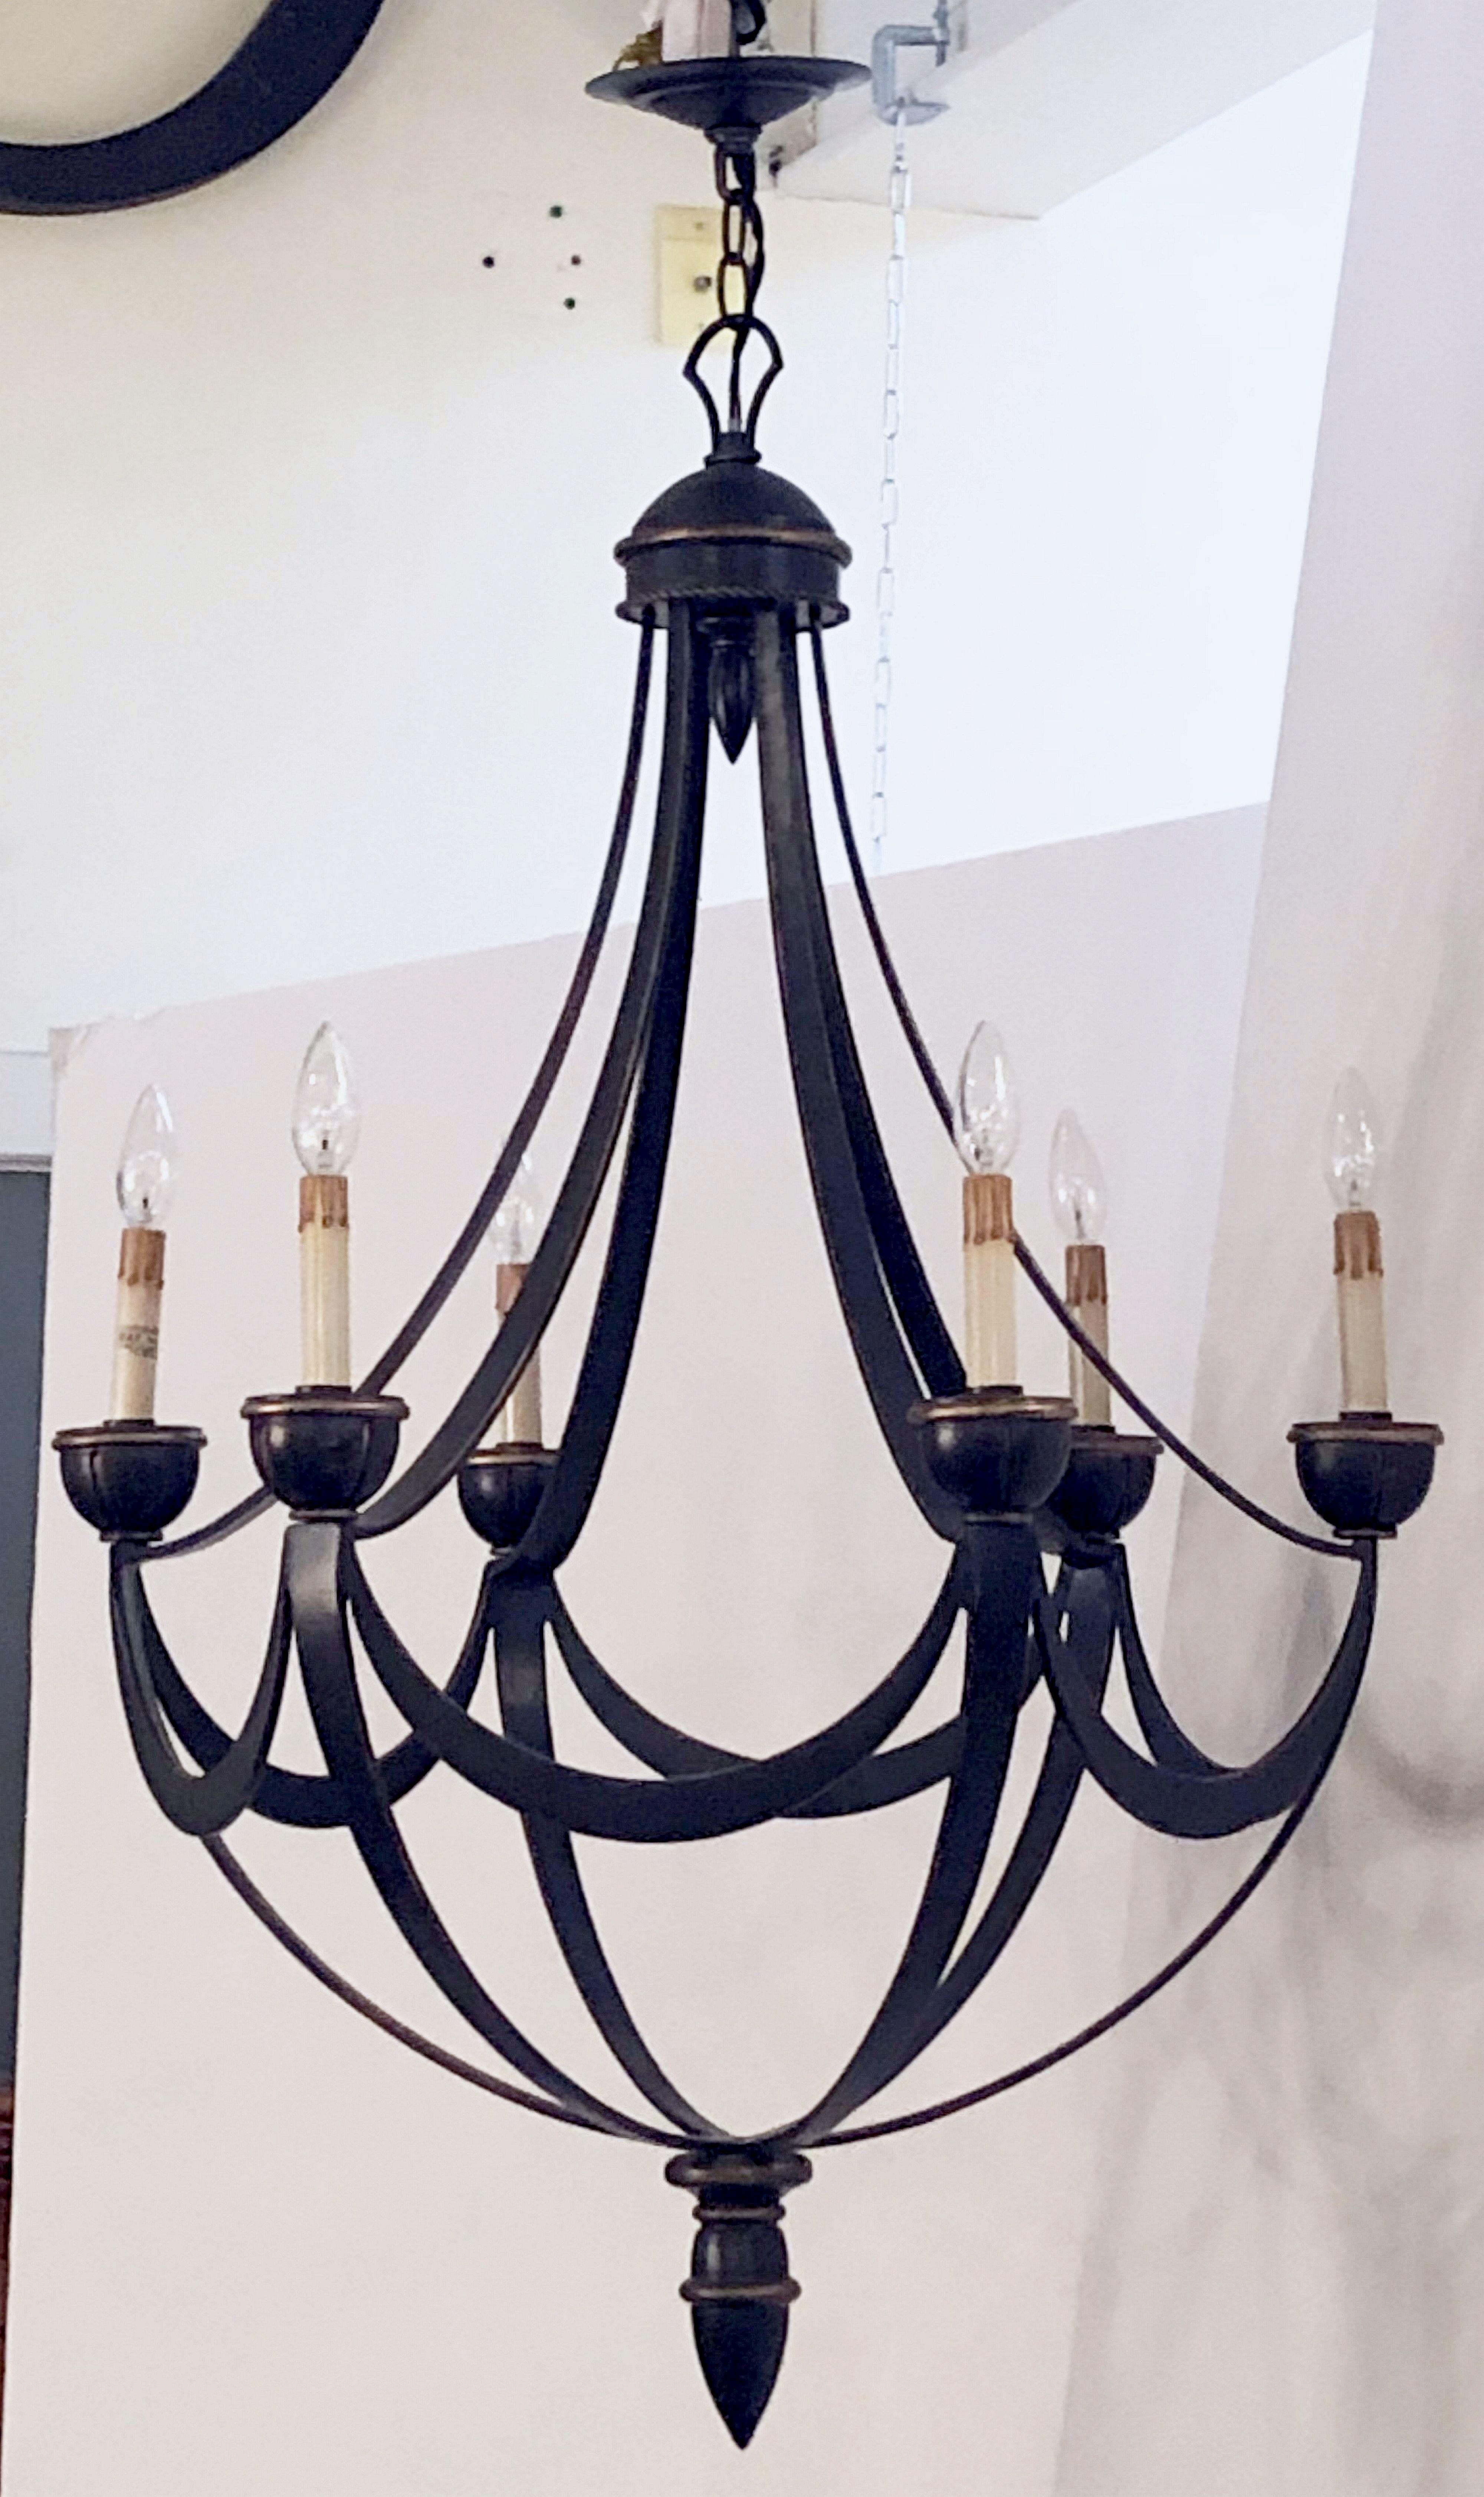 A handsome American six-light hanging light fixture or chandelier (29 inches diameter) of metal and resin, featuring a modern Empire-style design, with elegant gilt accents.

U.S. wired, ready for display.